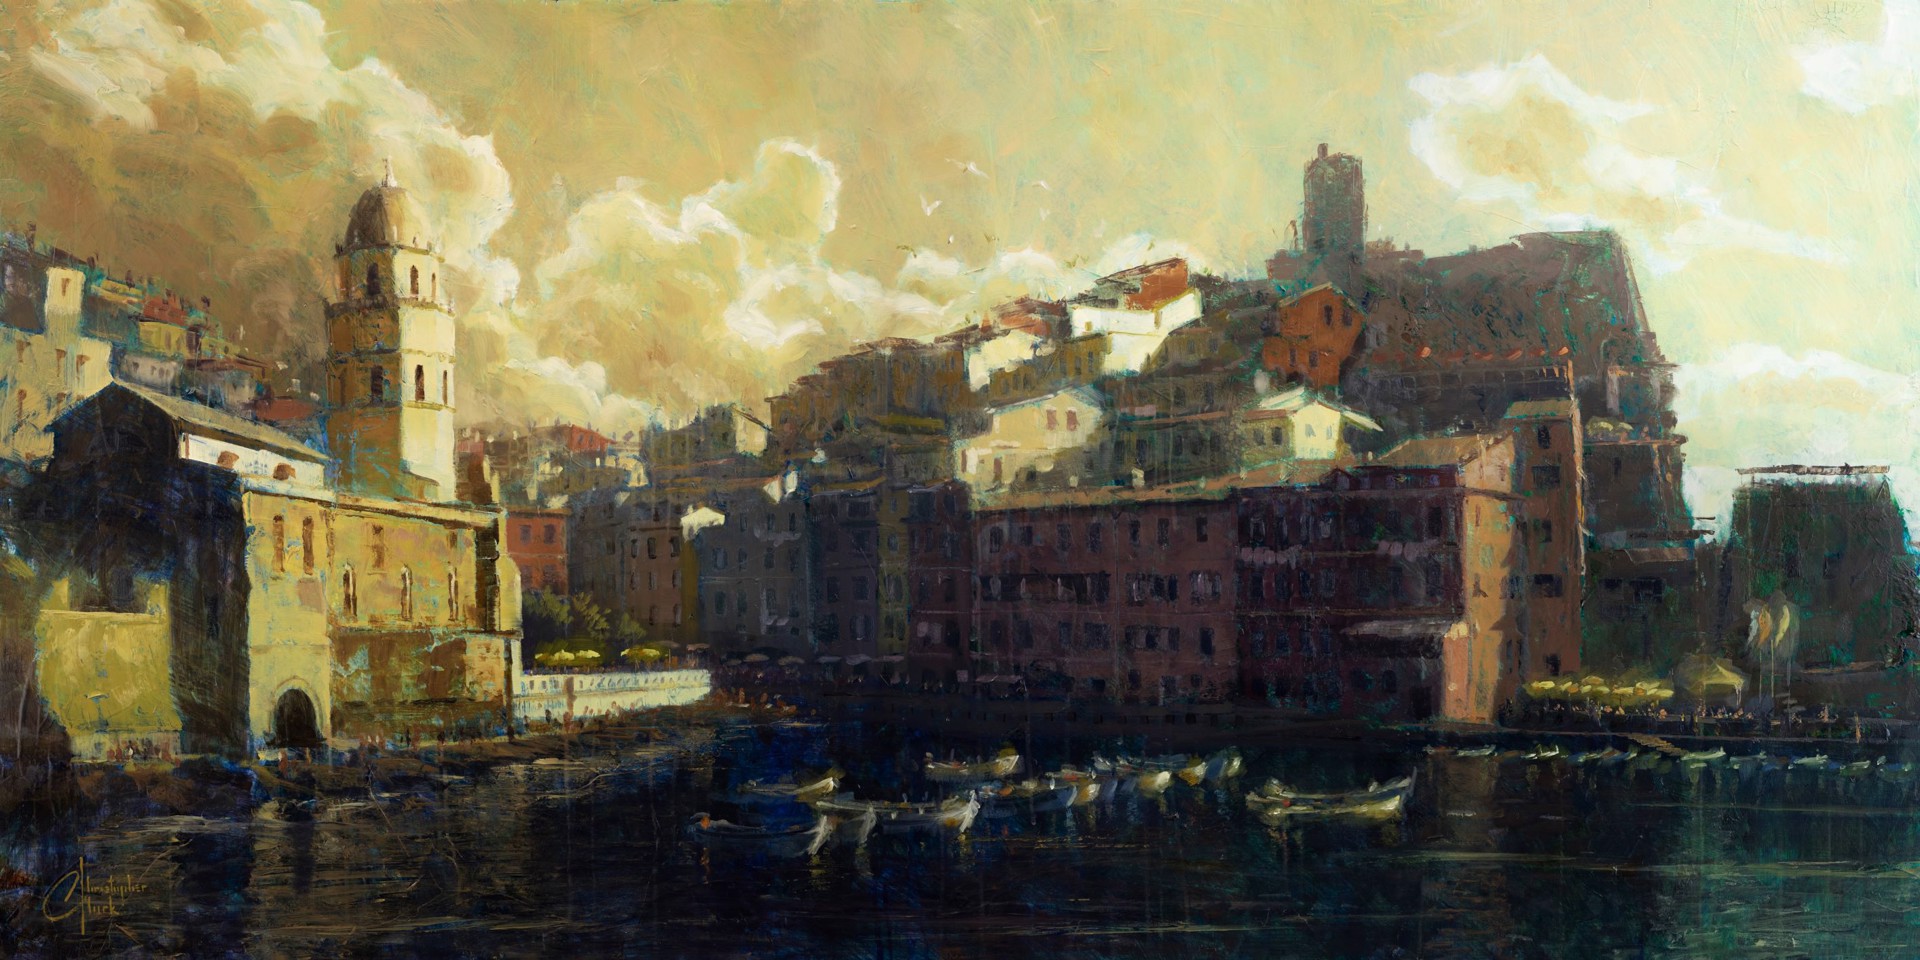 Vernazza Harbor by Christopher Clark